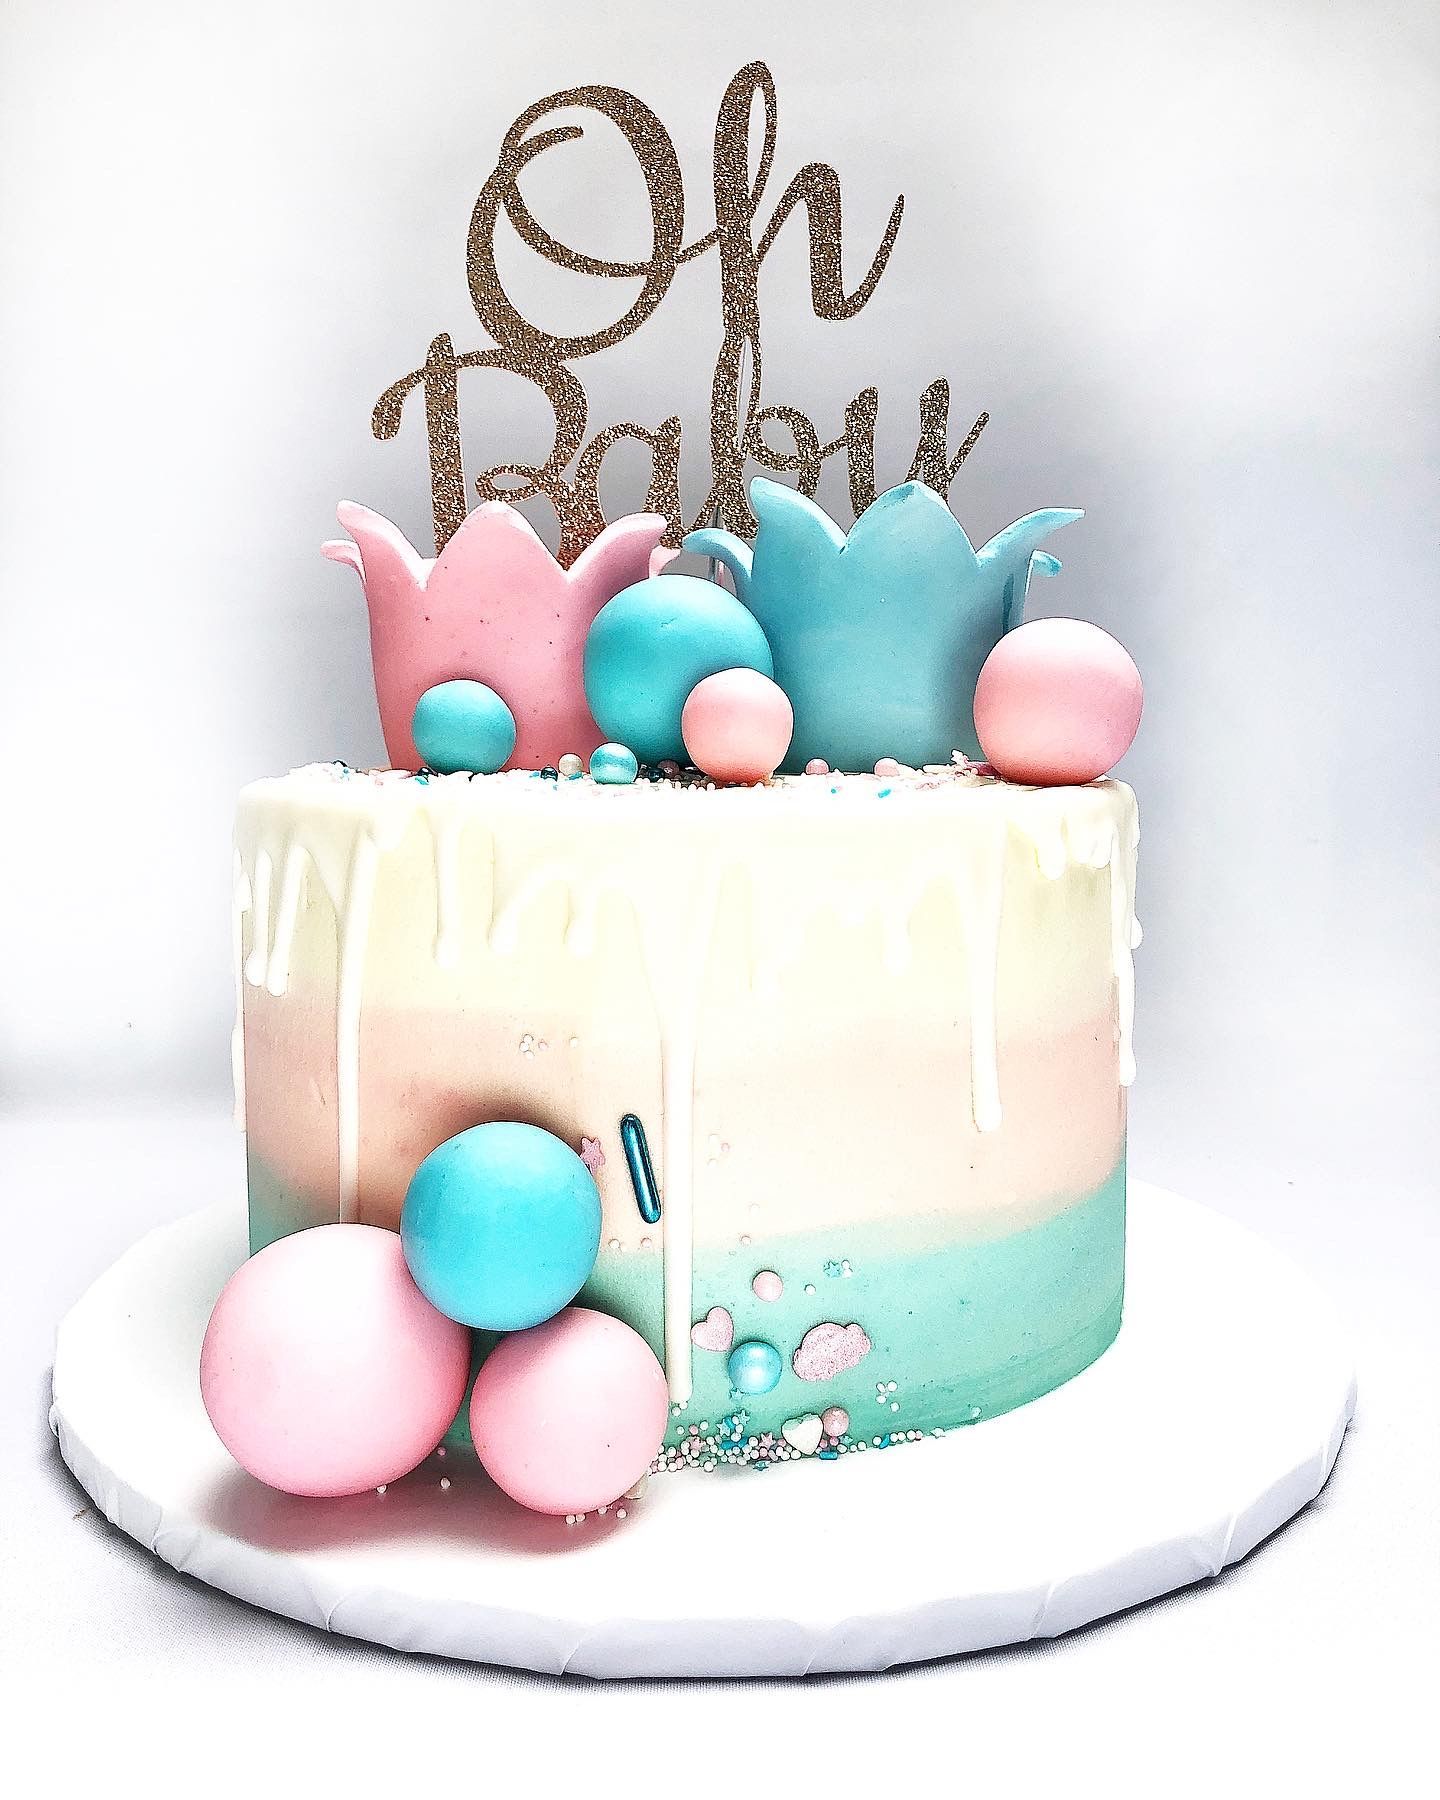 A Gender Reveal Cake with pale blue, pink and ivory ombre effect buttercream, pastel blue and pink fondant balls and a cake topper in gold reading 